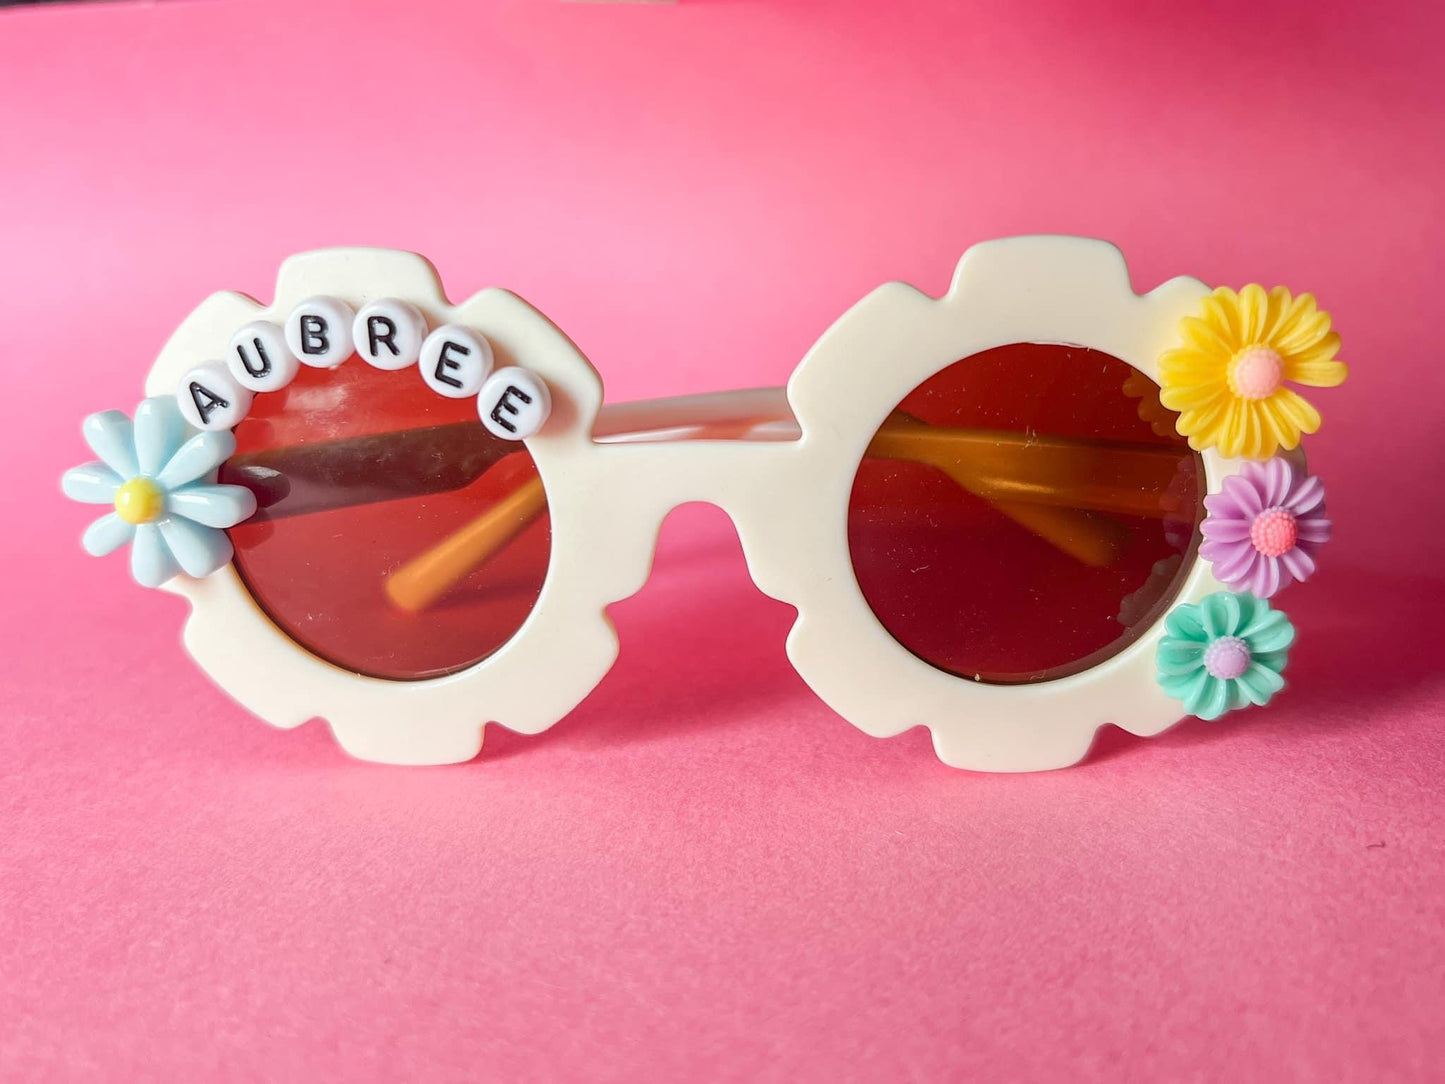 Kids Build your own Sunnies with cookies